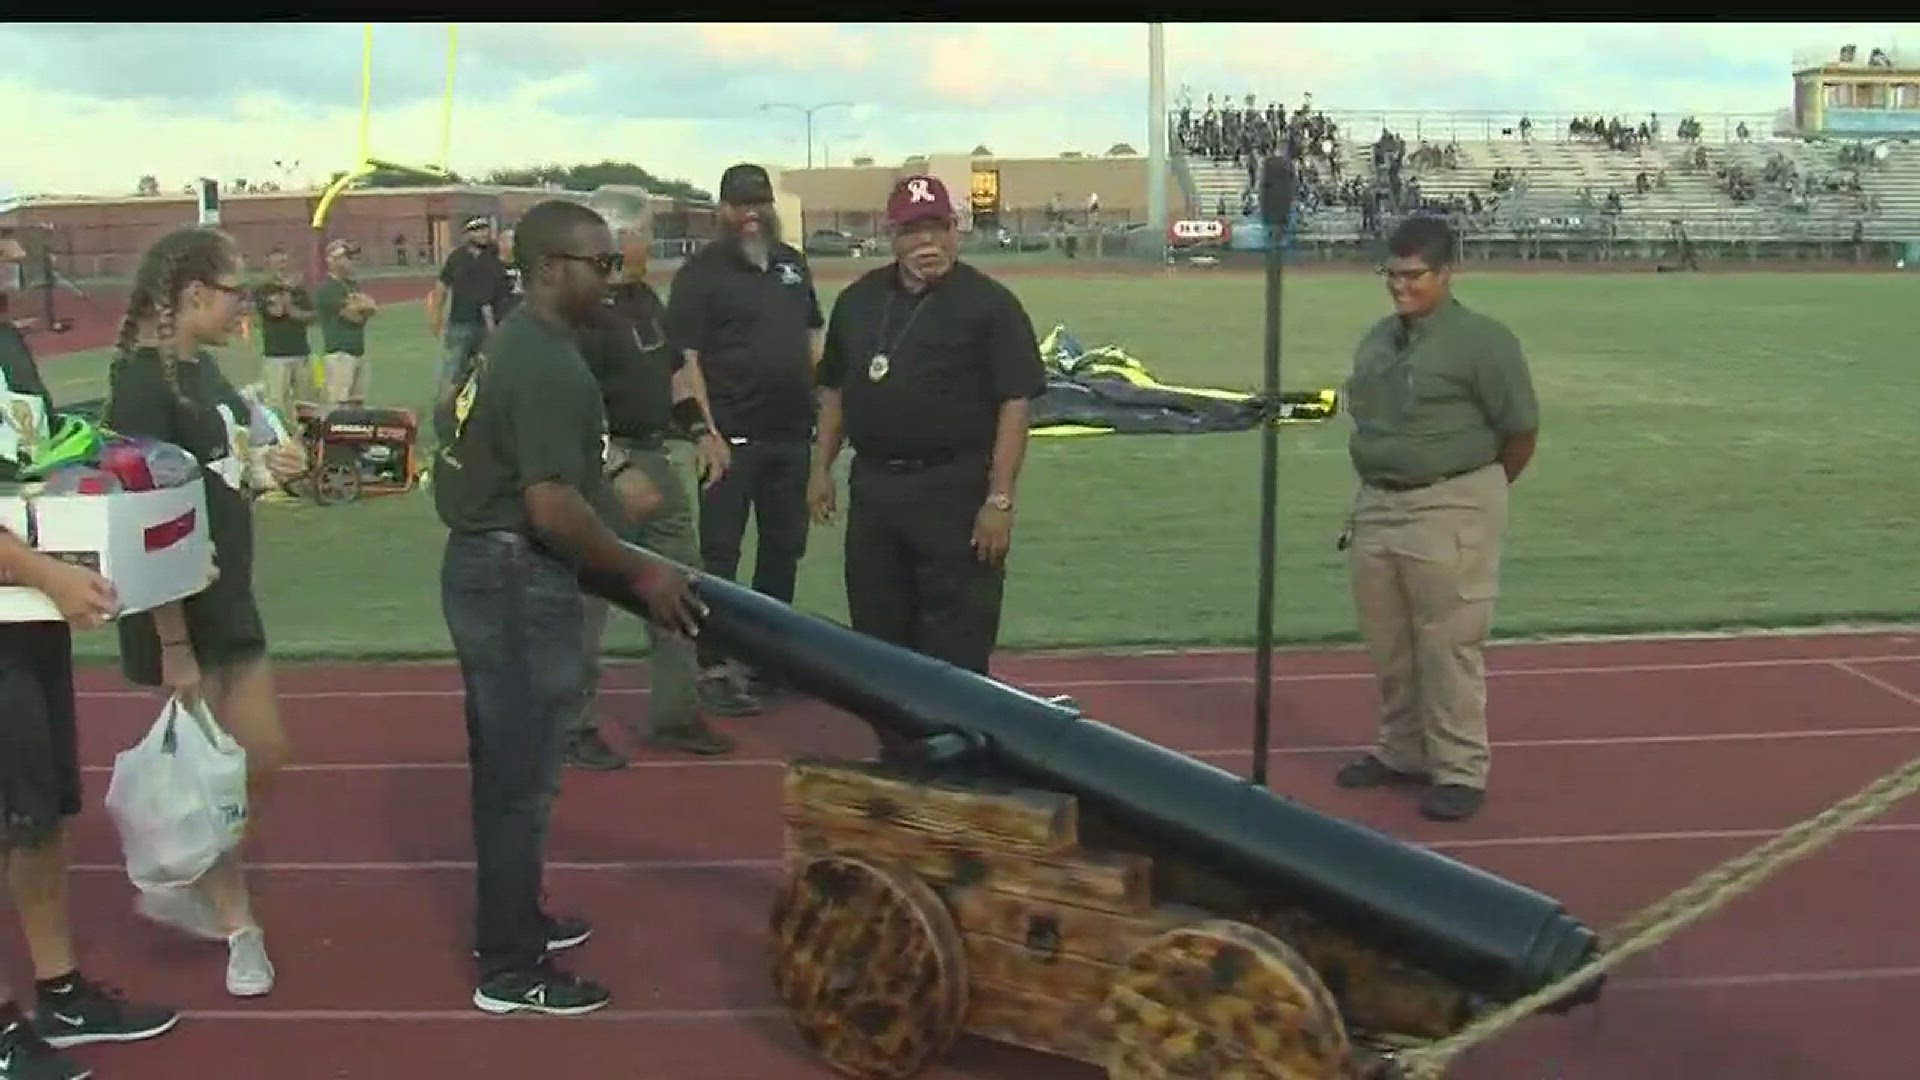 Students from a Dallas area school brought some cheer to the Rockport Pirates on Friday.